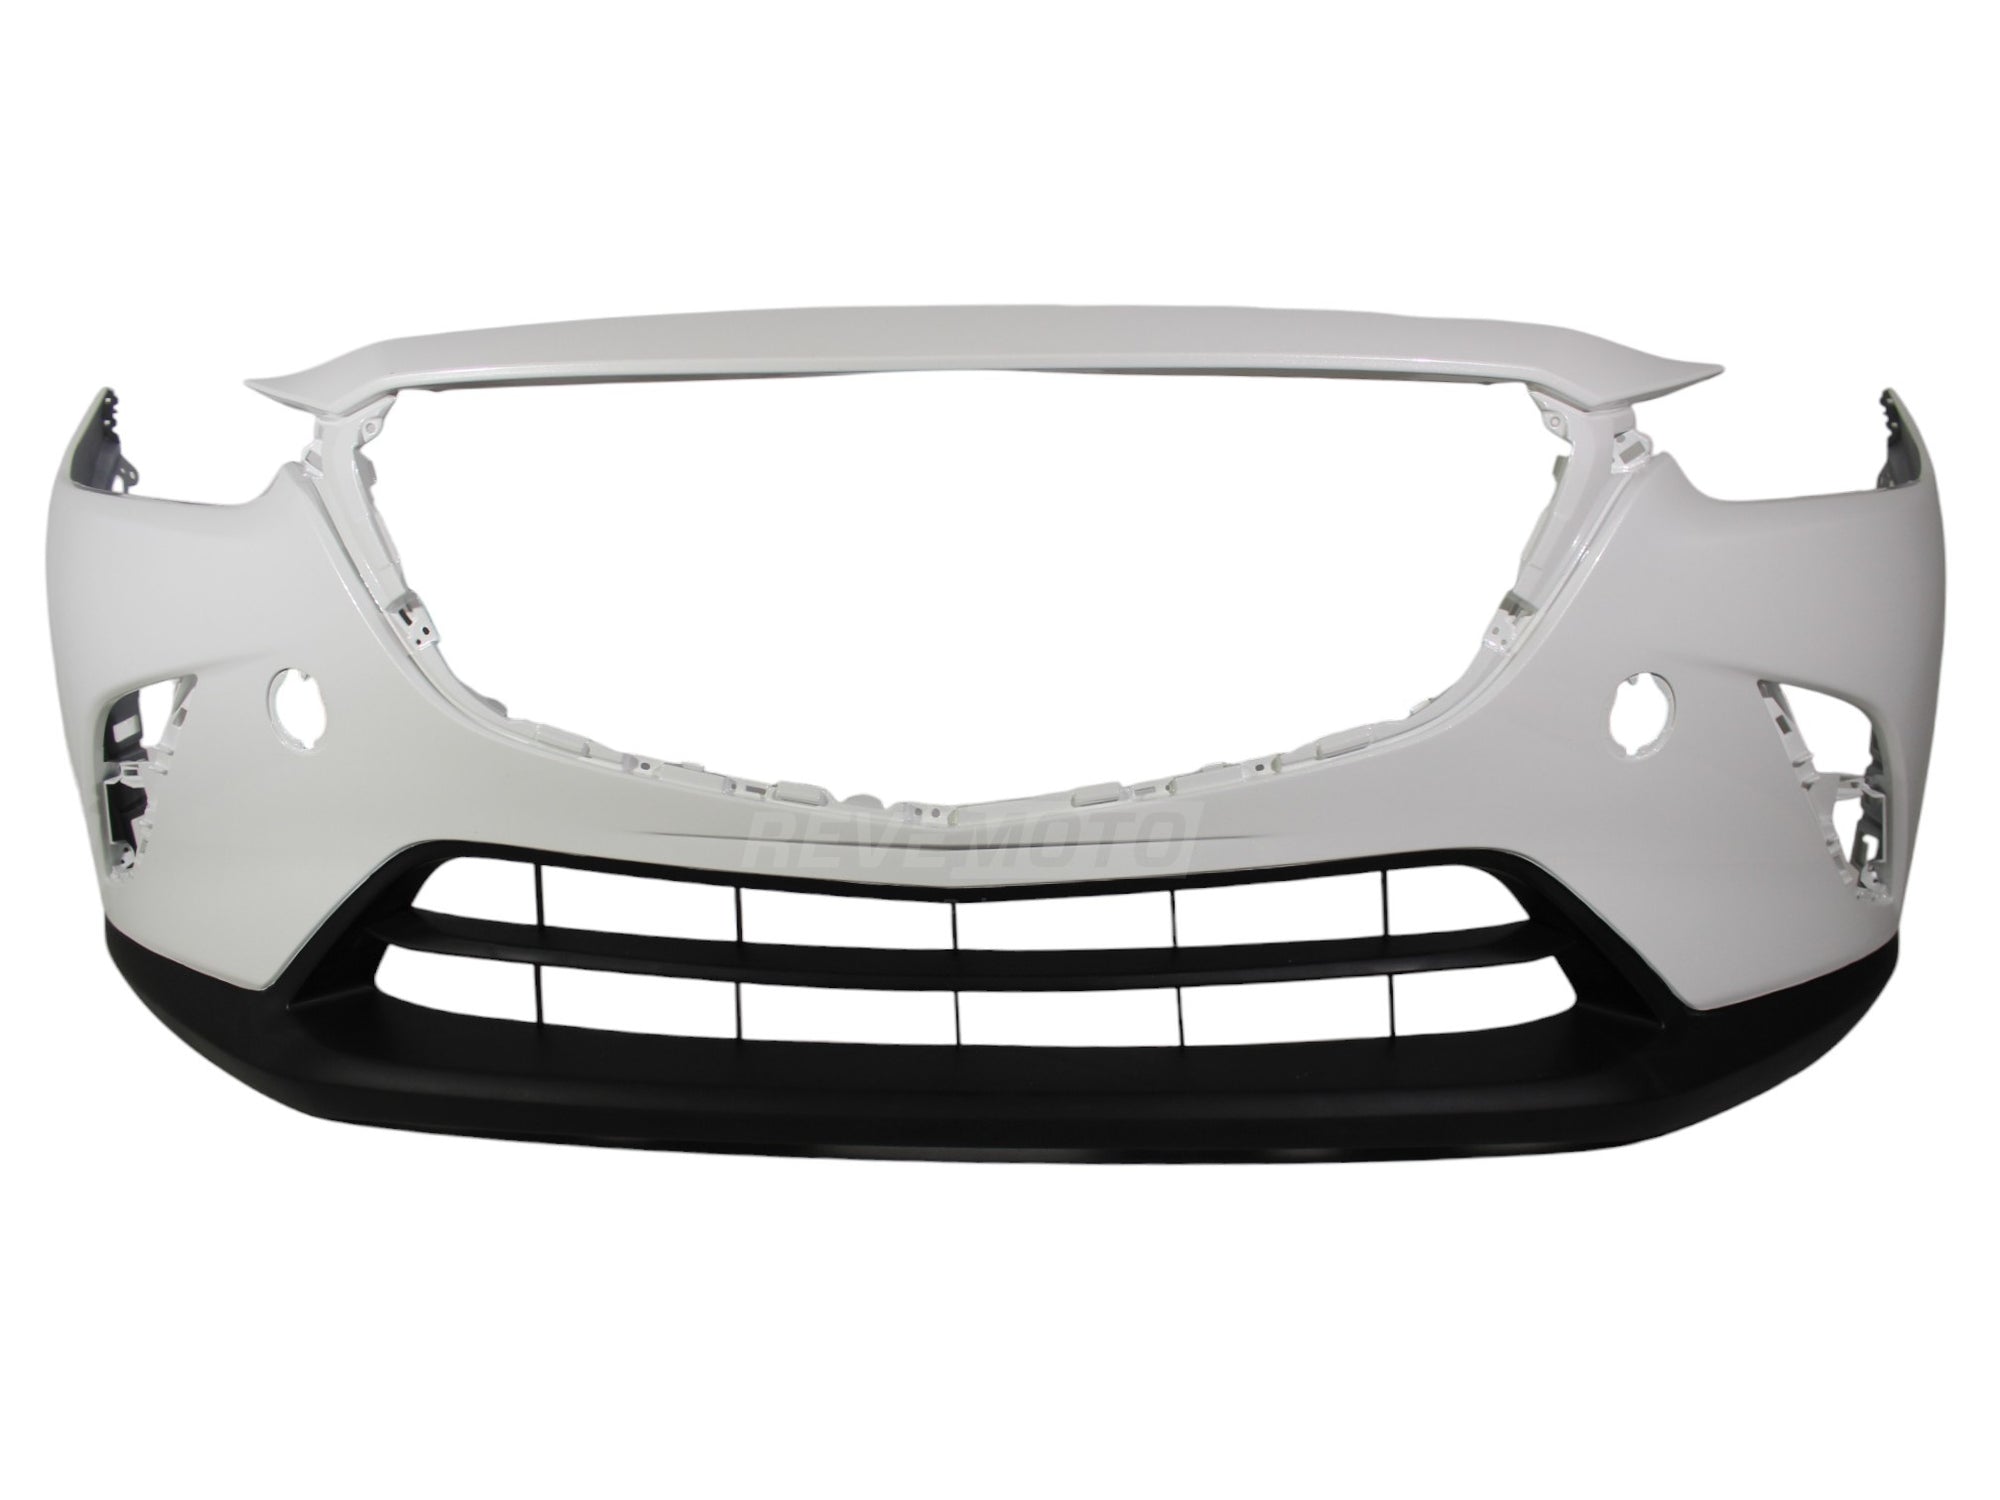 2019-2022 Mazda CX-3 Front Bumper Painted Snowflake Pearl Tricoat (25D) - ReveMoto Painted Auto Body Parts